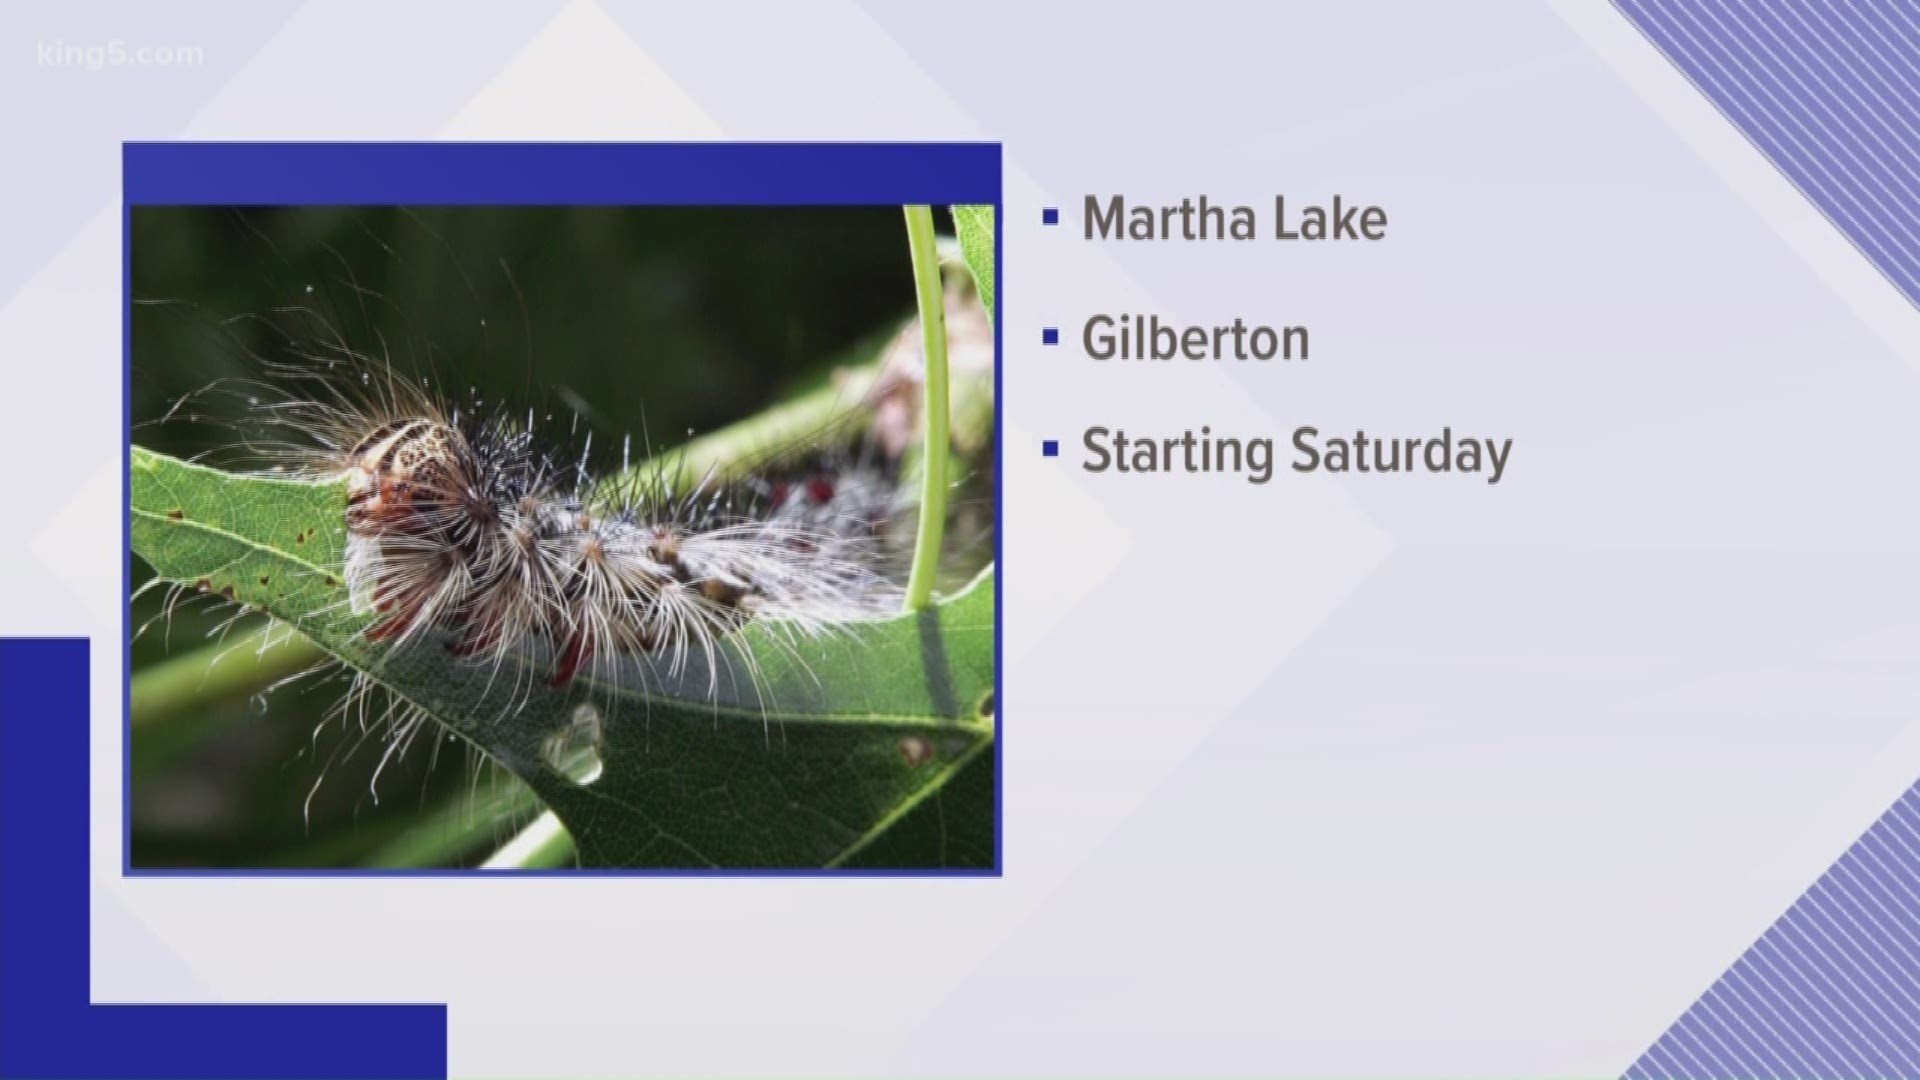 Gypsy moths feed on more than 500 types of plants and trees and are known to wipe out massive agricultural areas around the country.